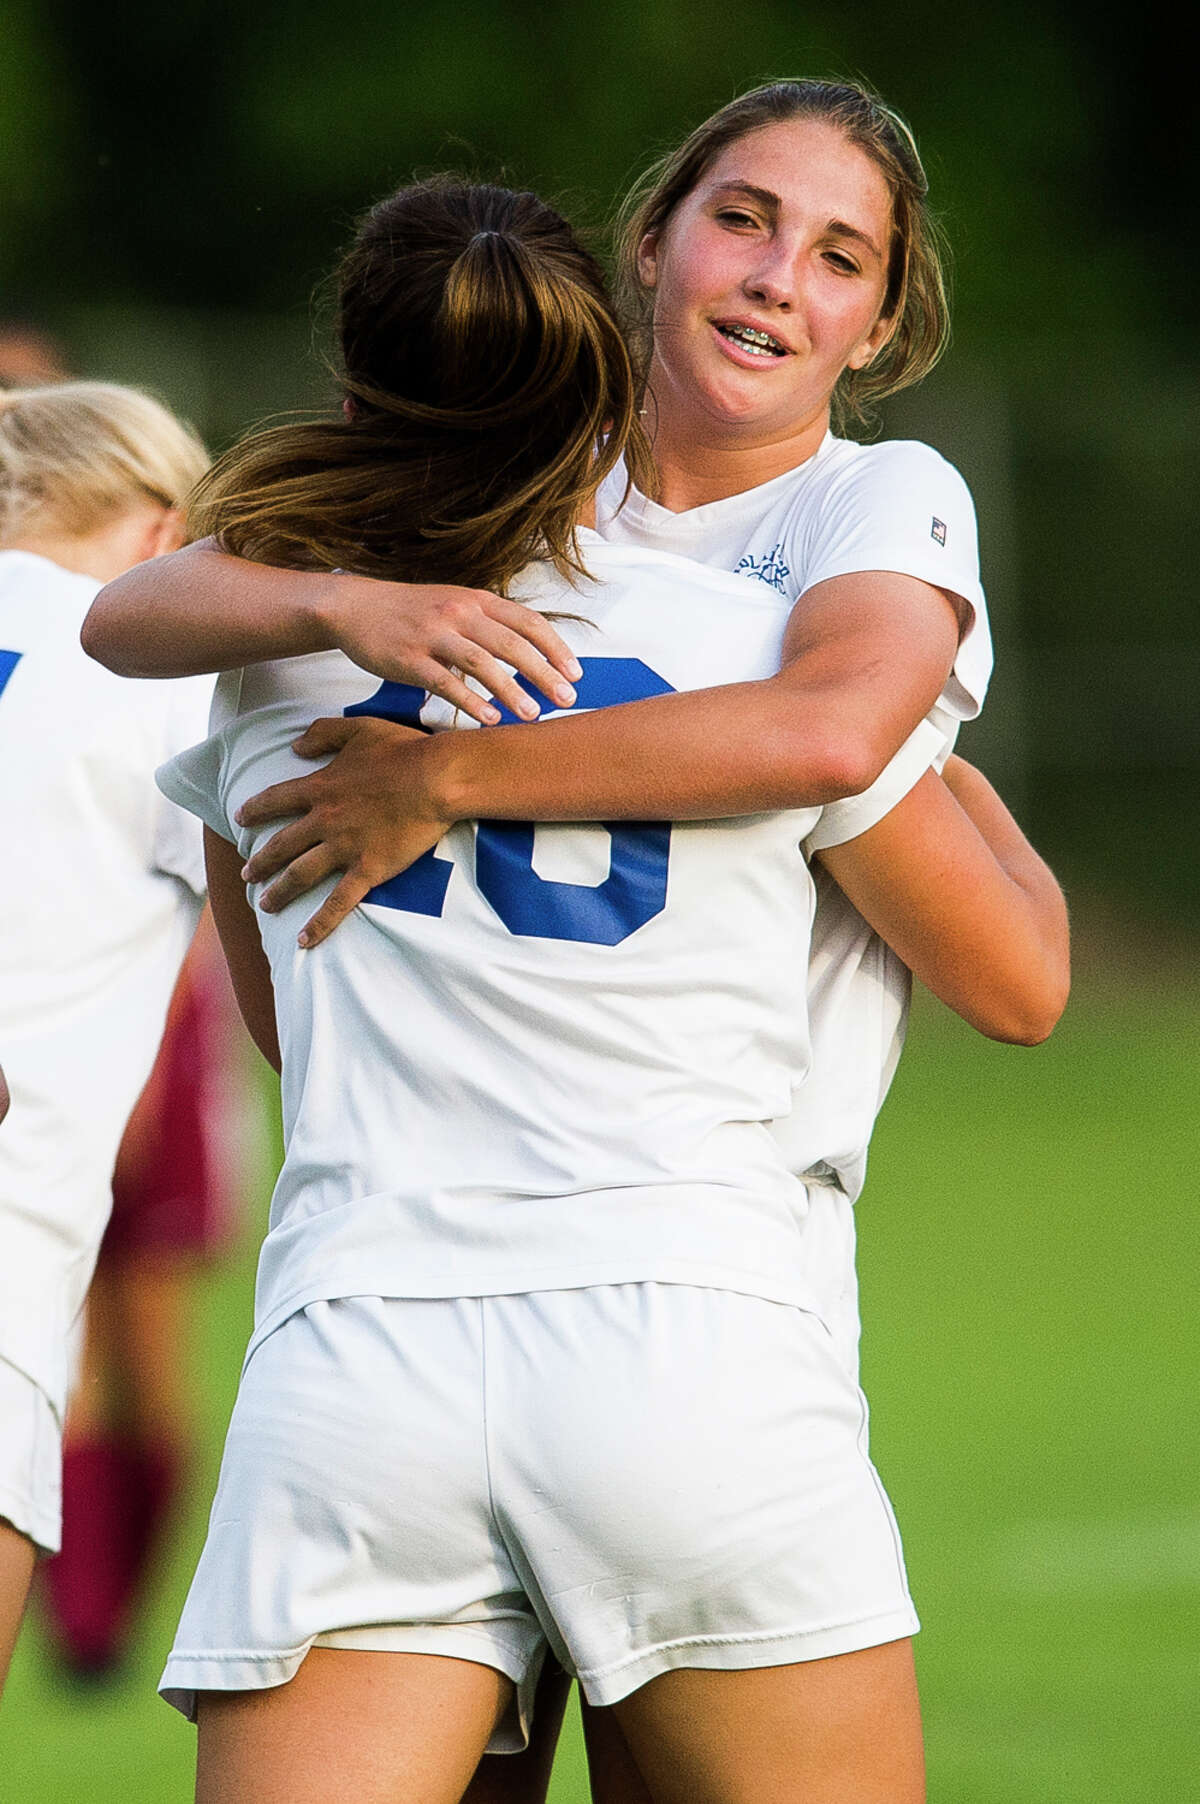 Midland players celebrate a goal during the Chemics' Division 1 regional final against Grandville on Friday, June 8, 2018 in Rockford. (Katy Kildee/kkildee@mdn.net)